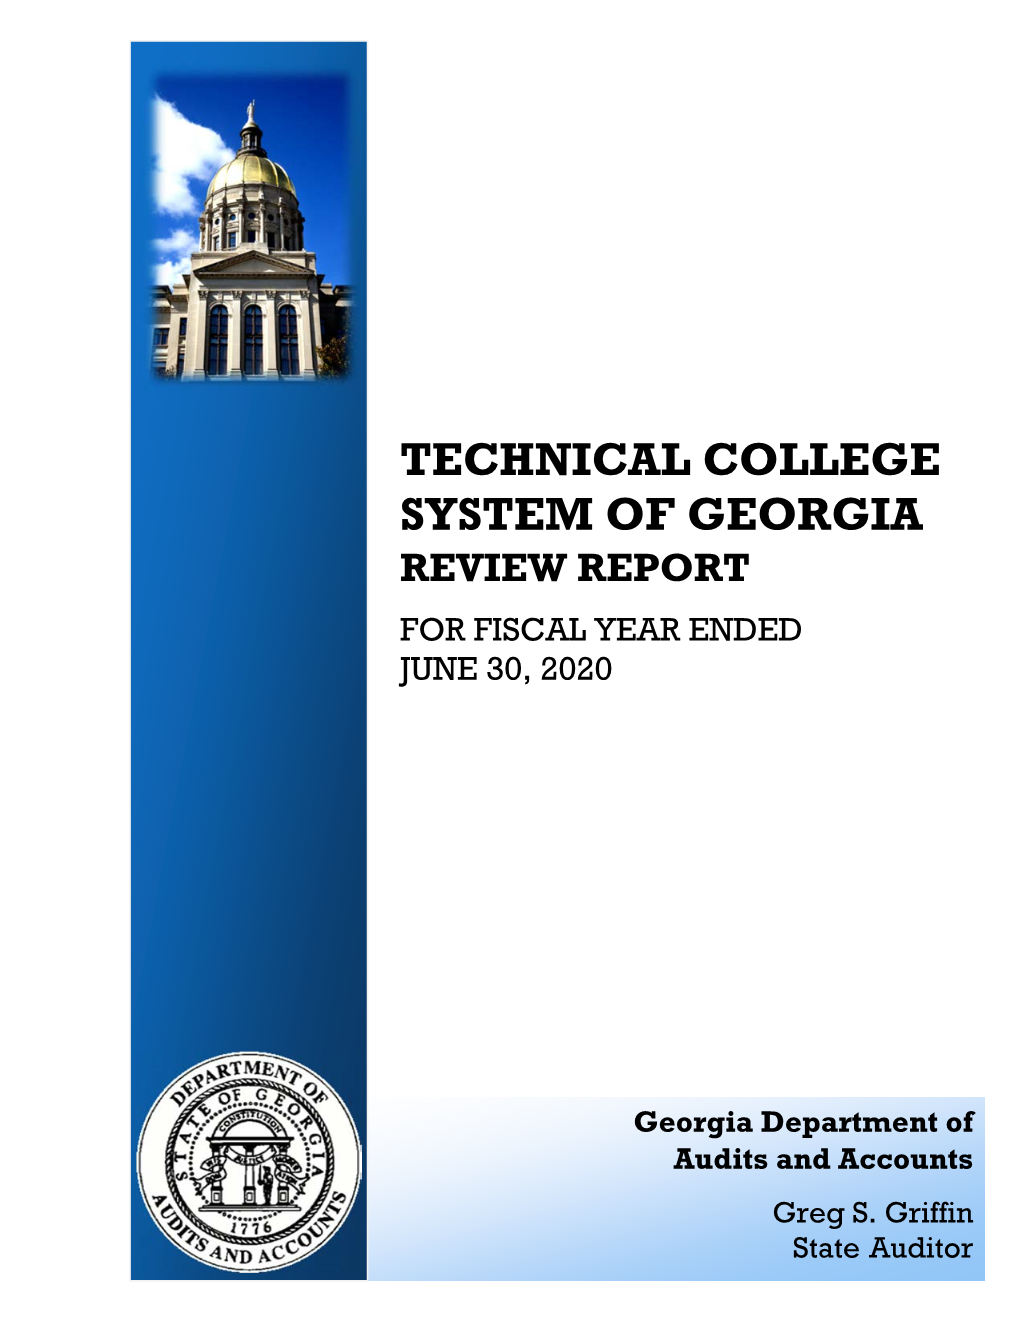 Technical College System of Georgia Review Report for Fiscal Year Ended June 30, 2020